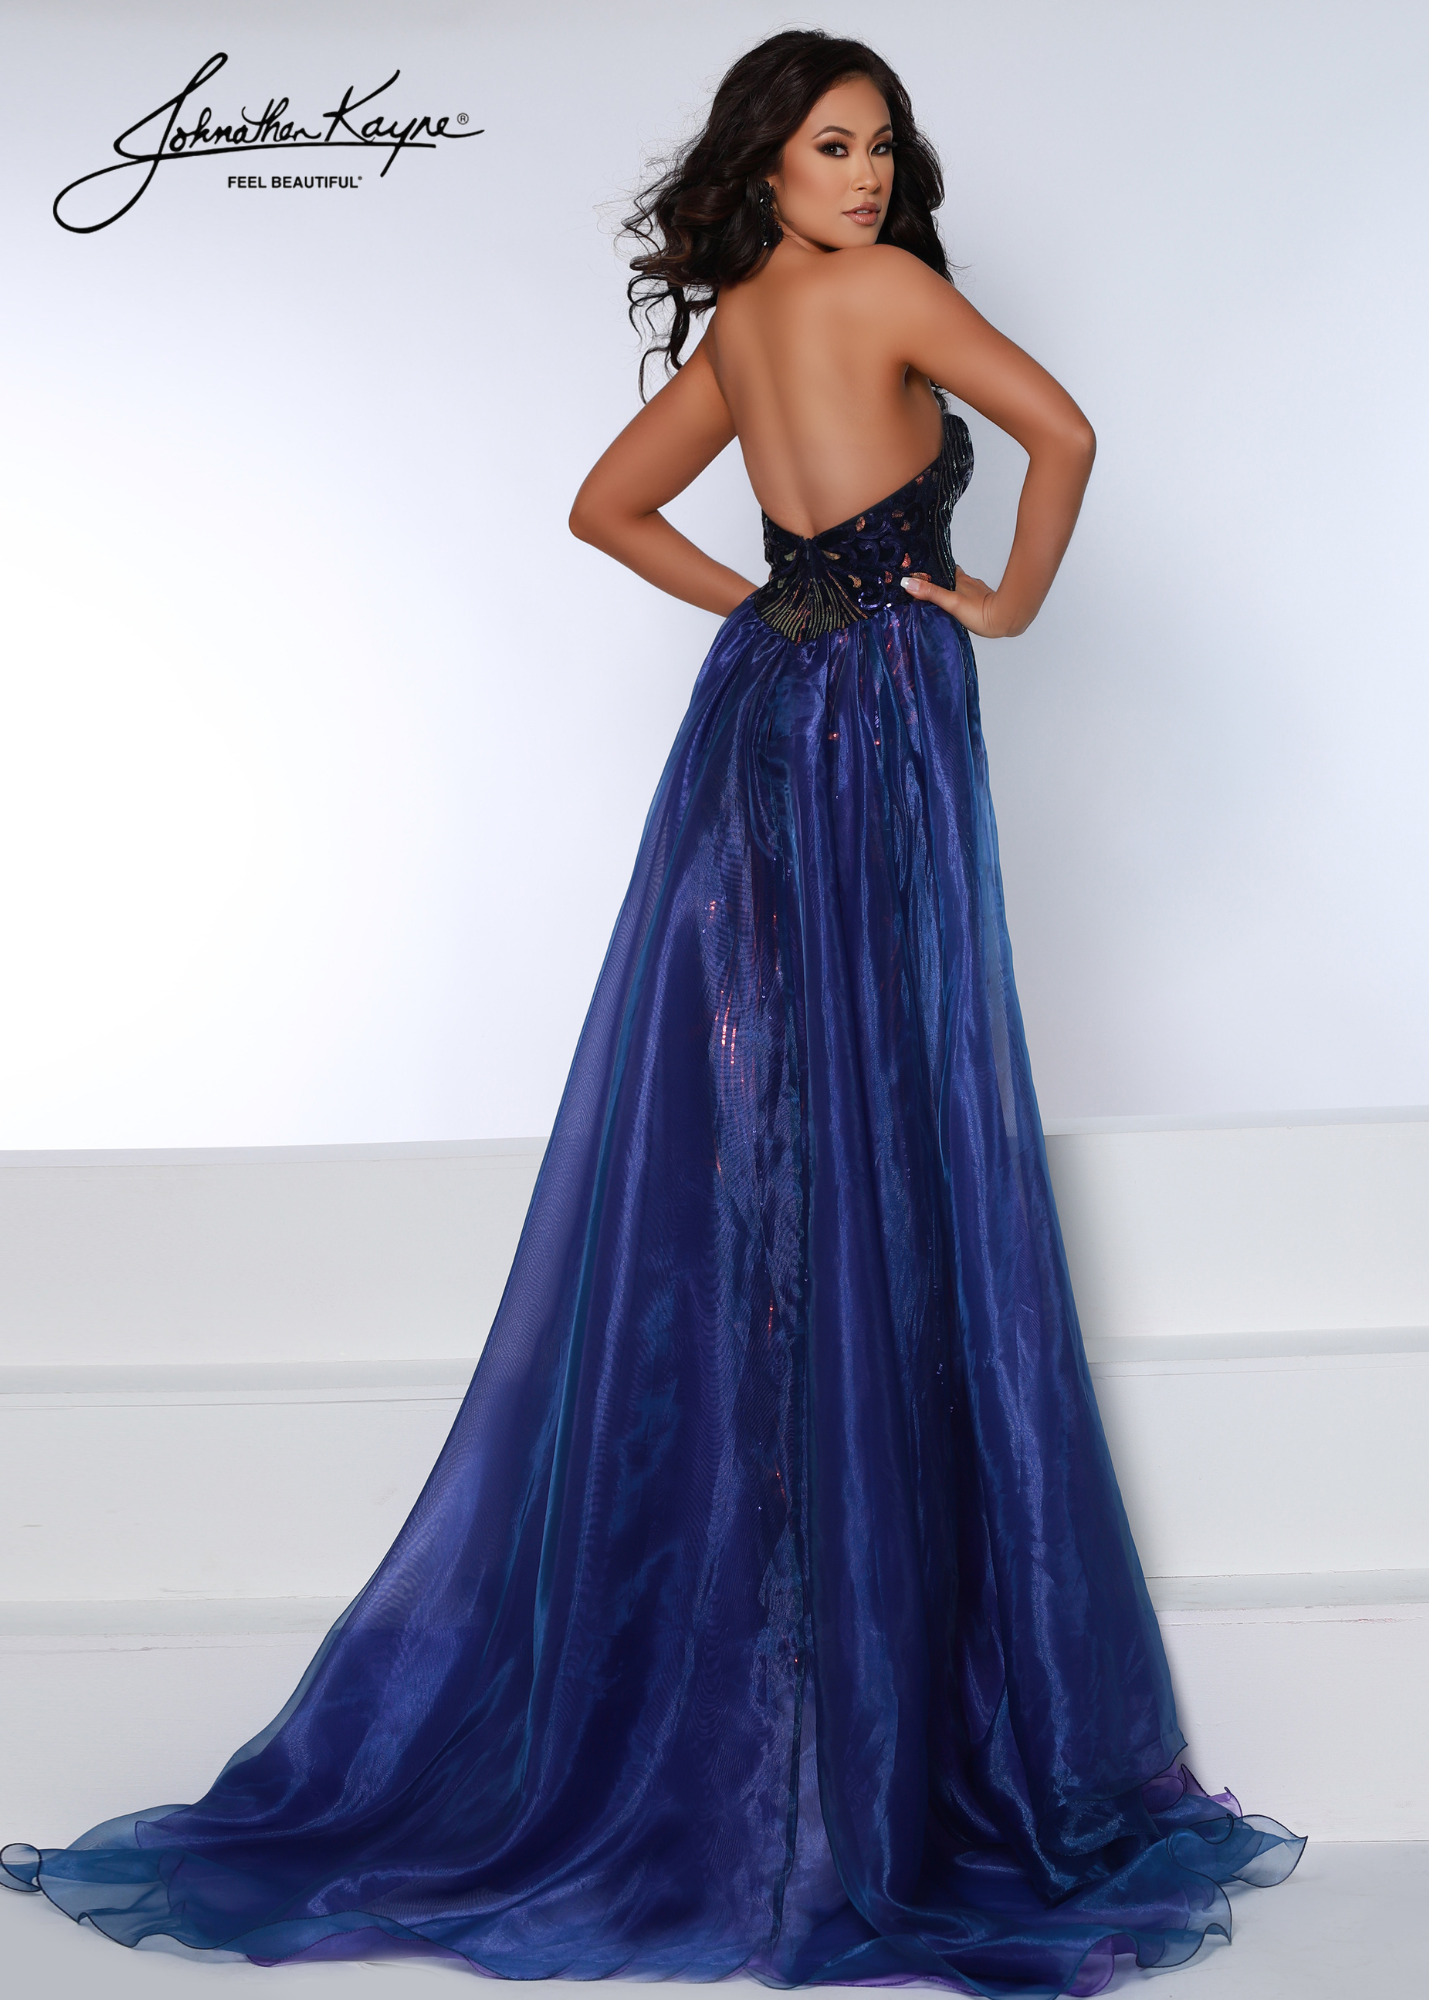 Johnathan Kayne 2709 Long Fitted Sequin Velvet Formal Dress Overskirt Prom Dress Pageant Chic happens! This strapless sequin stretch velvet gown is completed with an overskirt and sexy thigh-high slit   Sizes: 00,0,2,4,6,8,10,12,14,16  Colors: Midnight